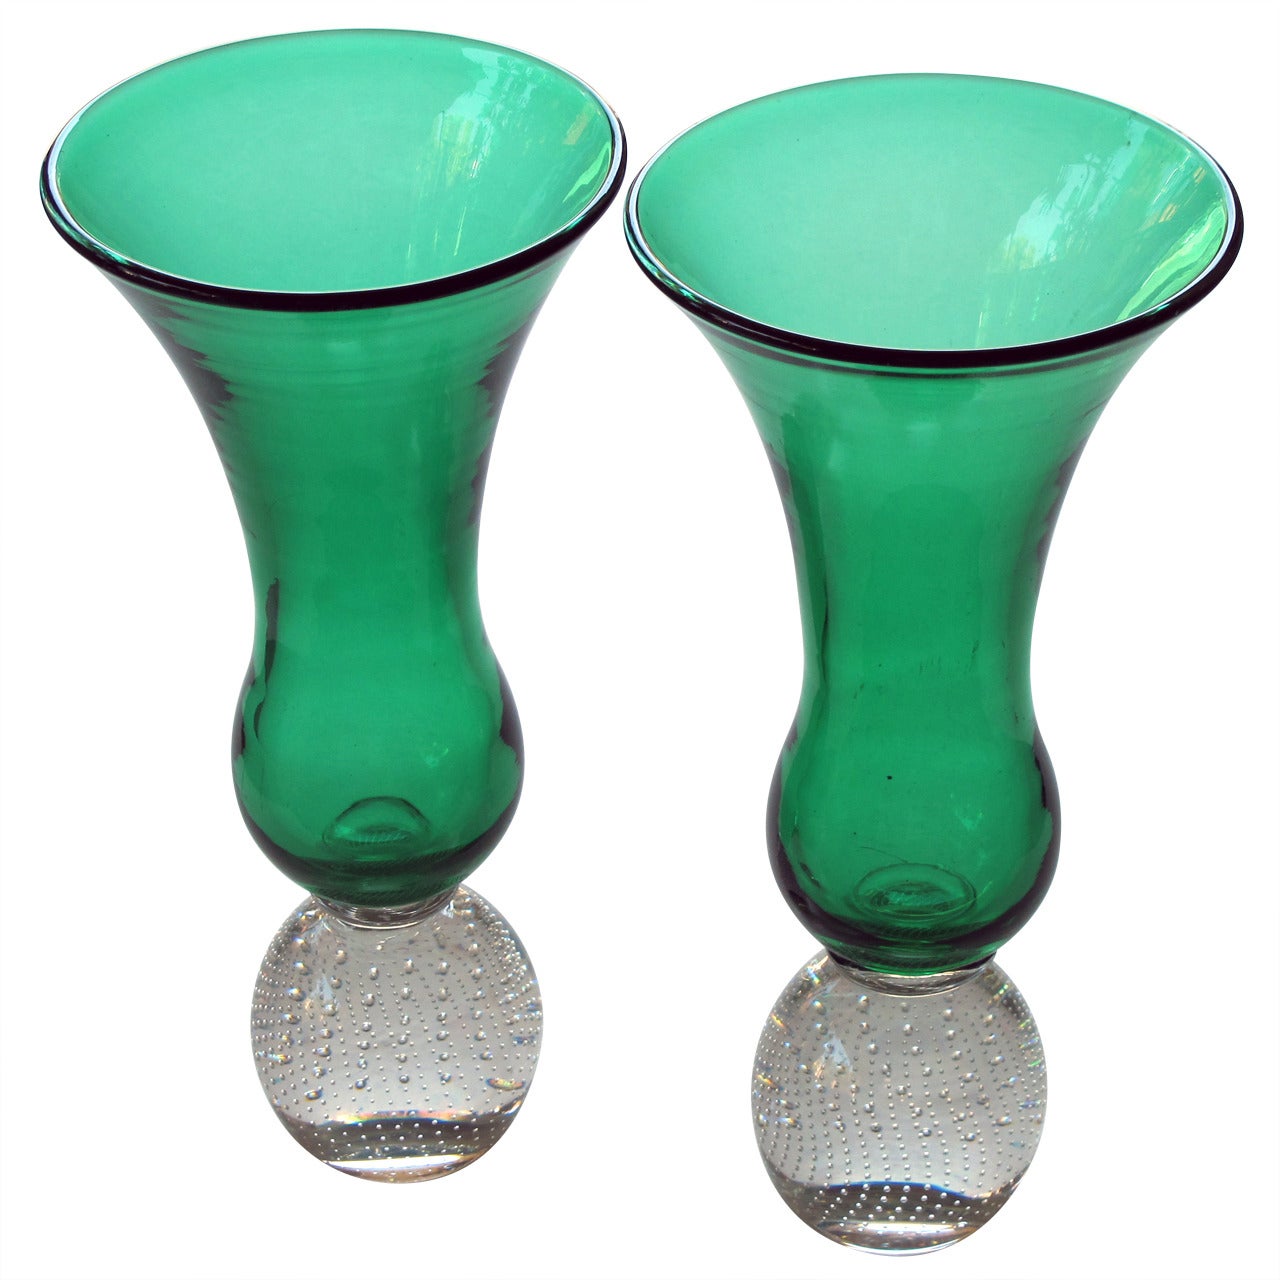 Shapely Pair of American Emerald-Green Trumpet Vases by Pairpoint Glassworks